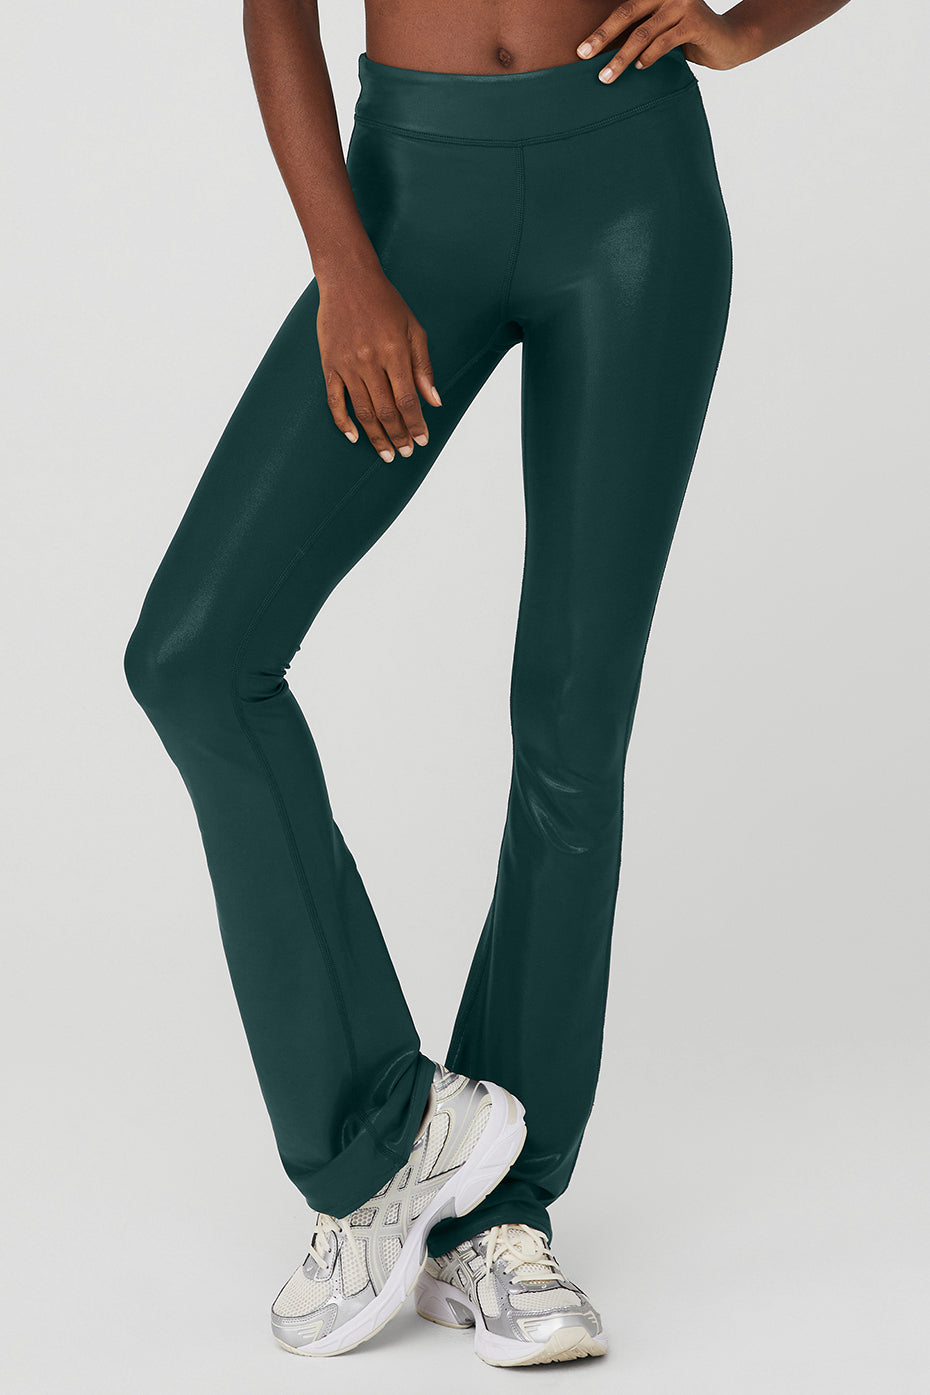 Women's Everyday Soft Ultra High-Rise Bootcut Leggings - All In Motion™  Green XS